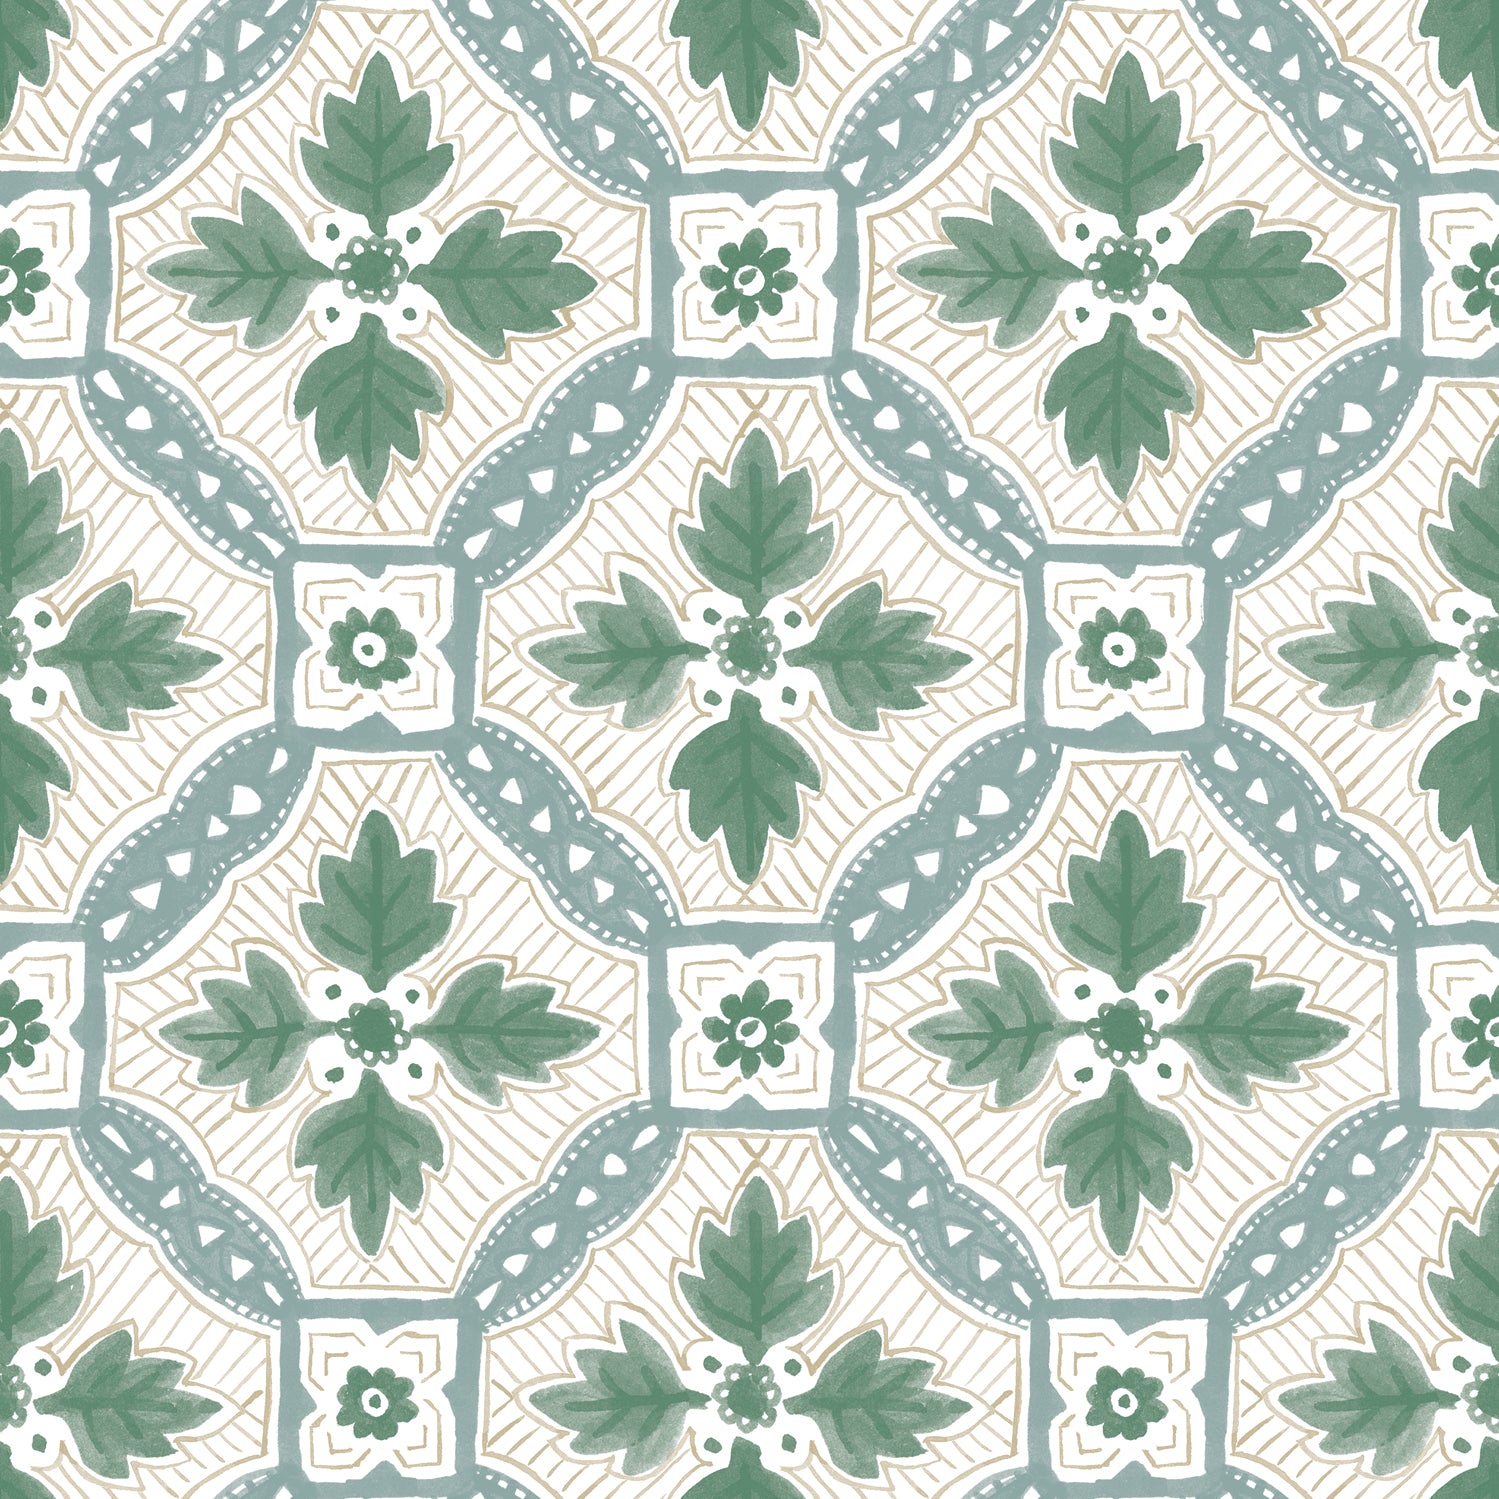 Detail of wallpaper in a painterly botanical grid in shades of green and tan on a white field.